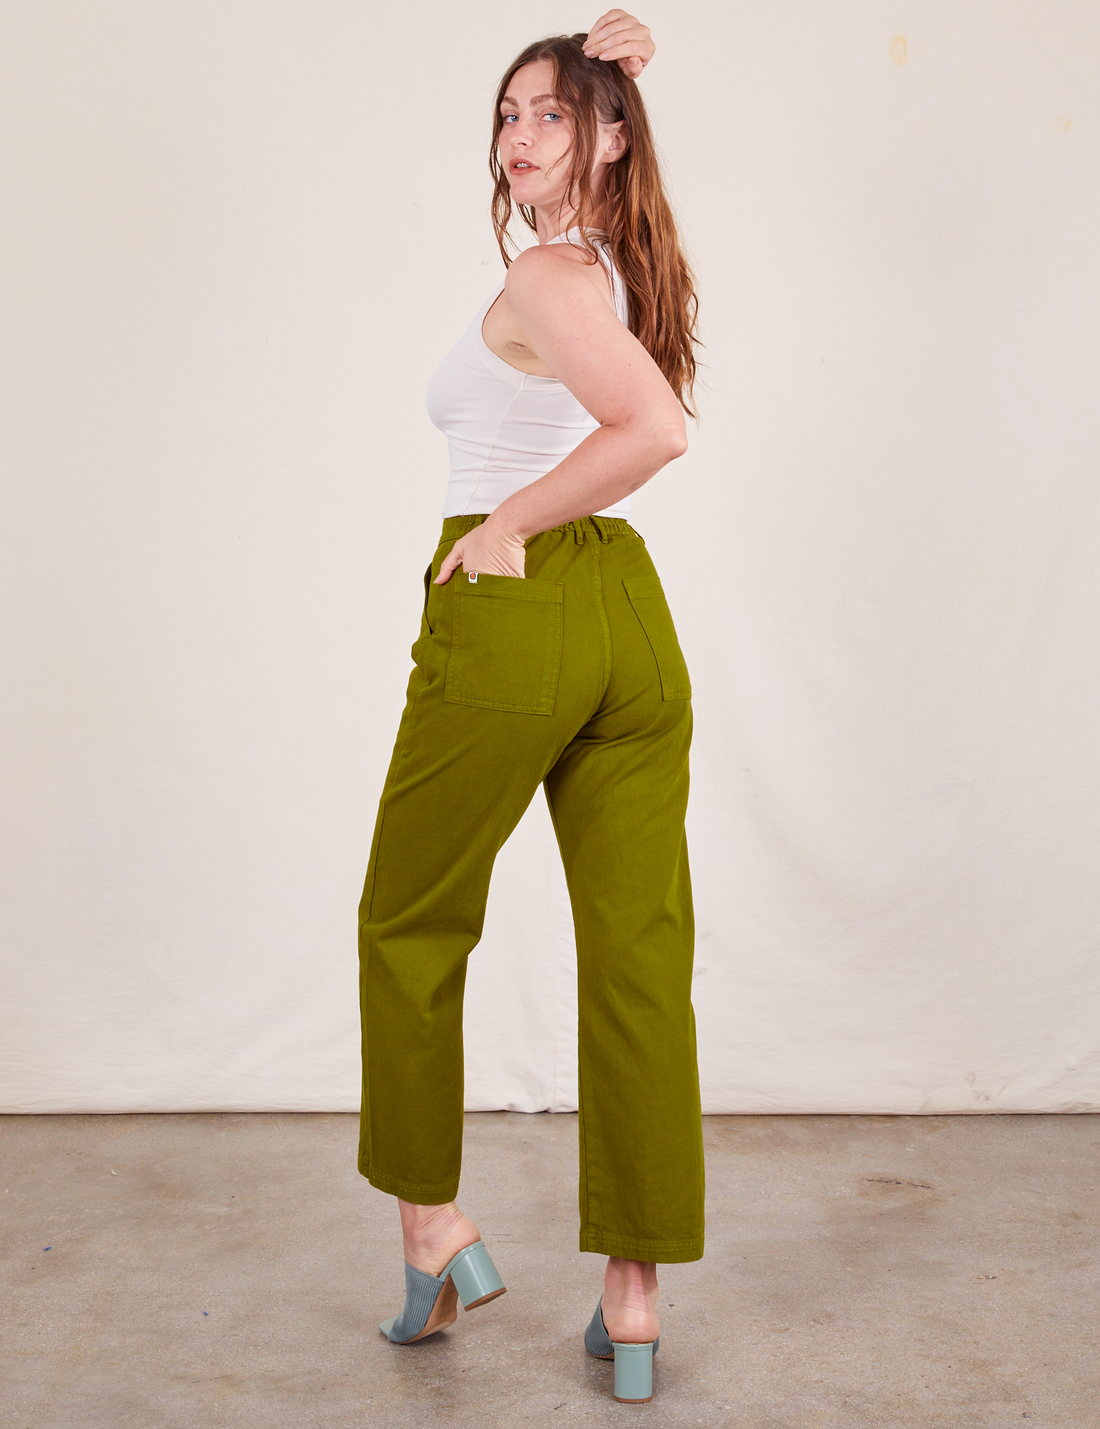 Work Pants in Olive Green back view on Allison wearing vintage off-white Tank Top